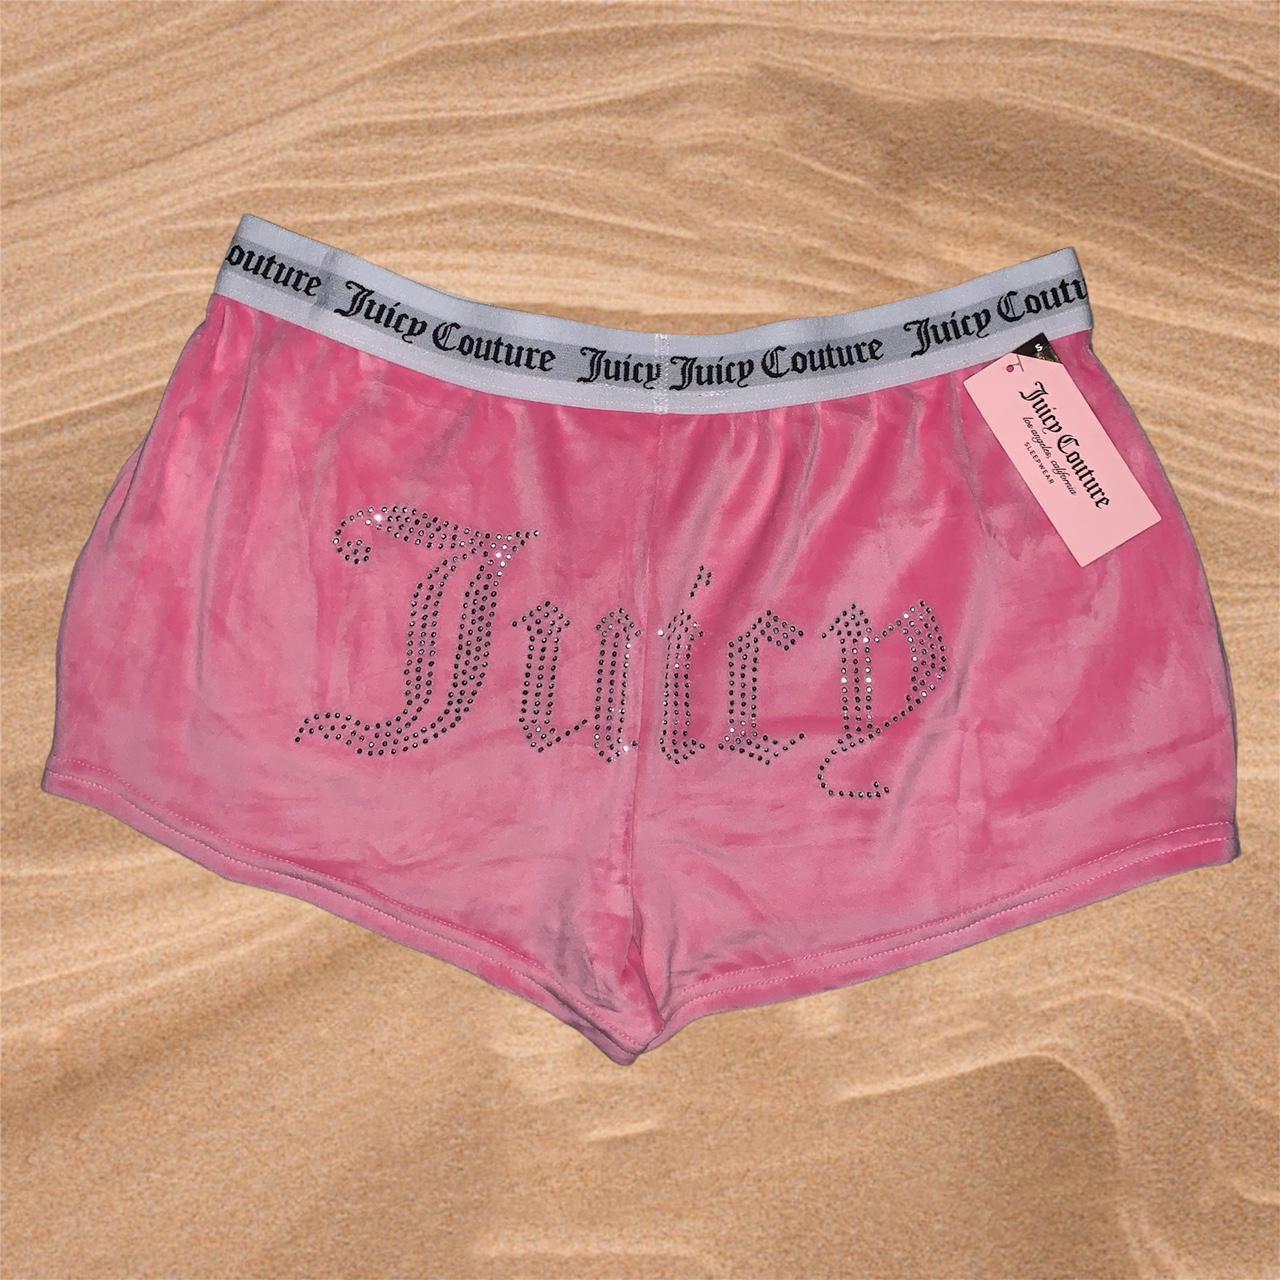 Juicy Couture Women's Silver and Pink Shorts